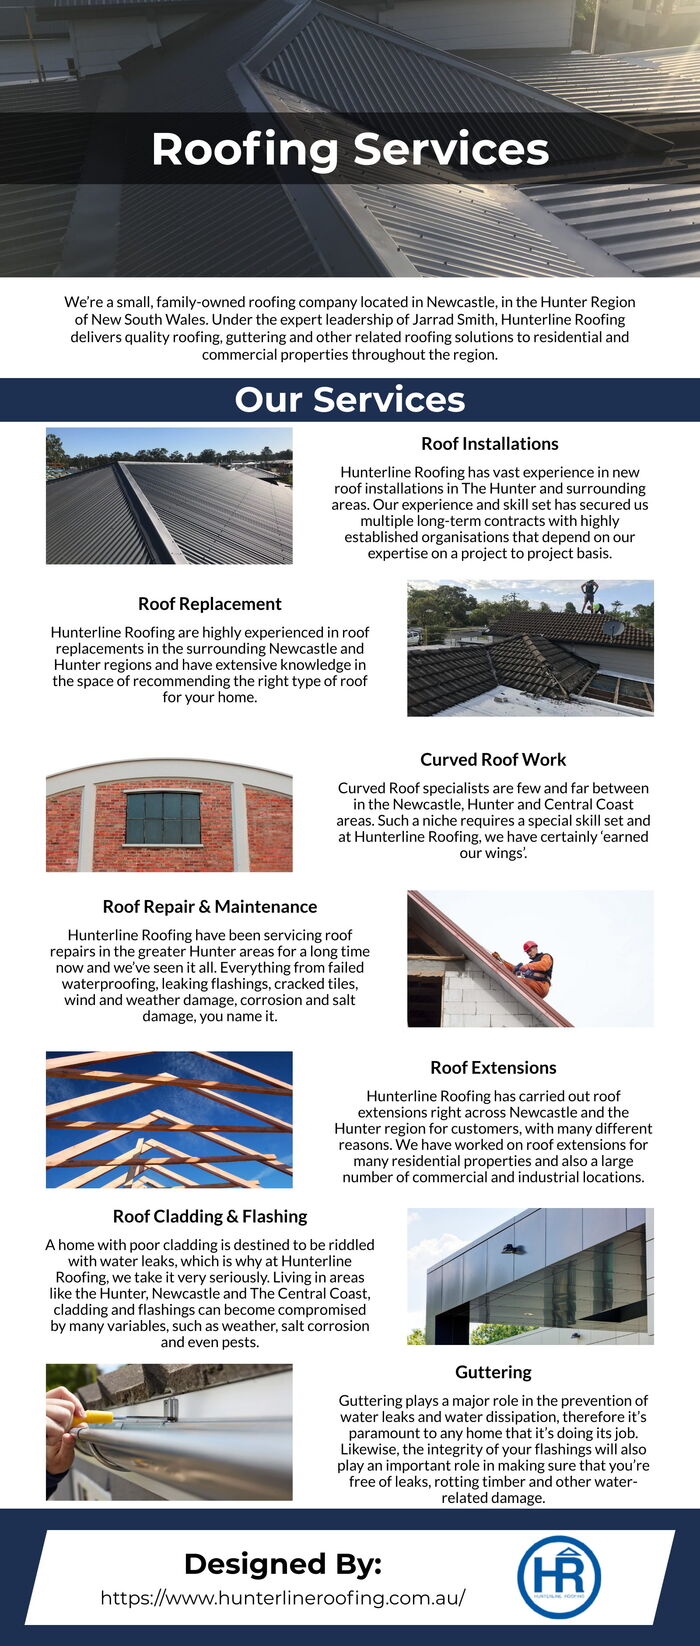 This infographic is designed by Hunter Roofing.